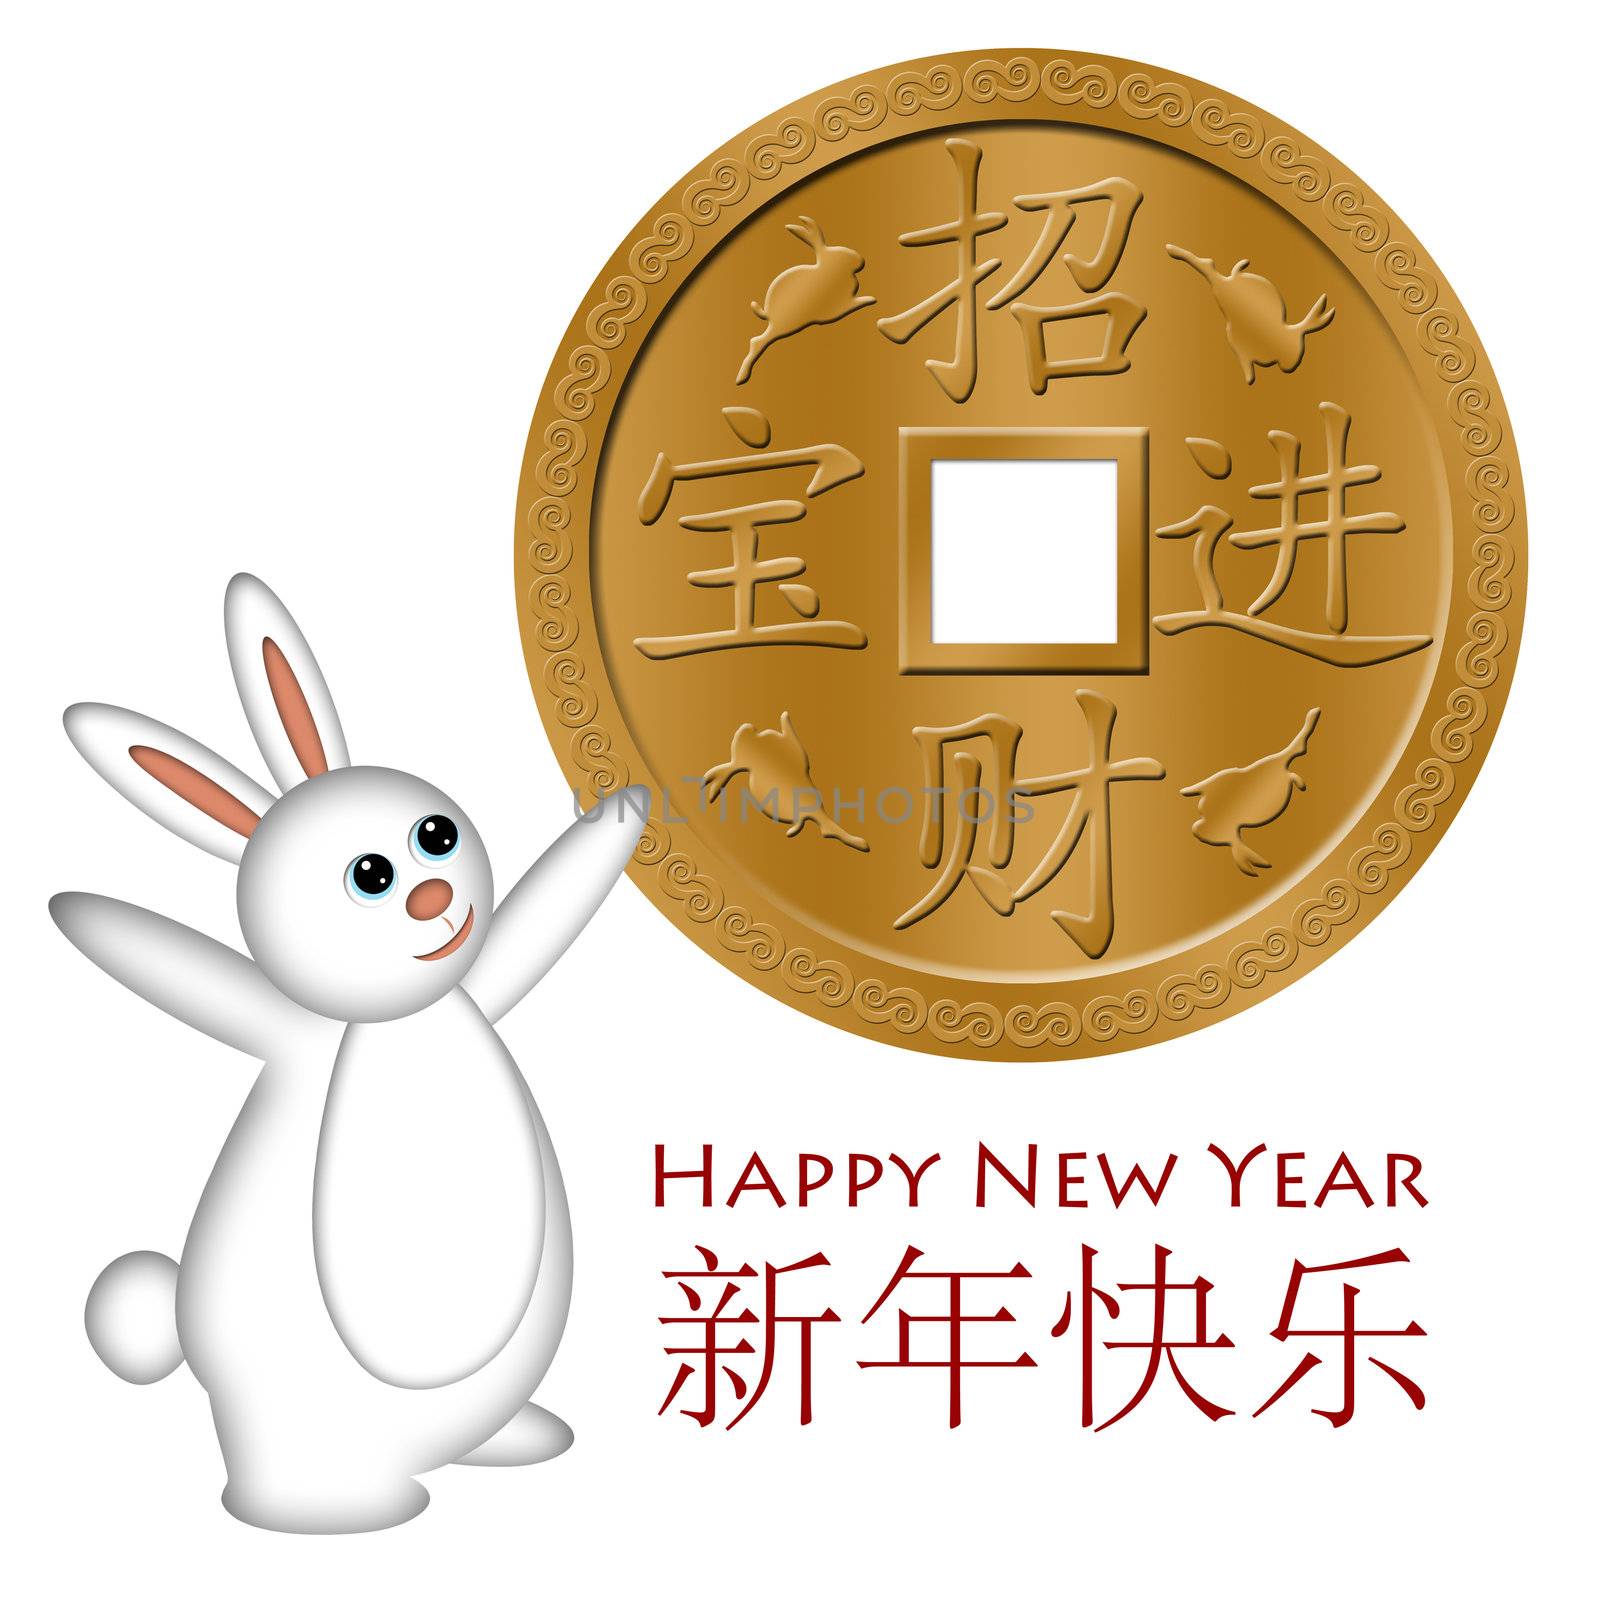 Rabbit Welcoming the Chinese New Year with Gold Coin Illustration